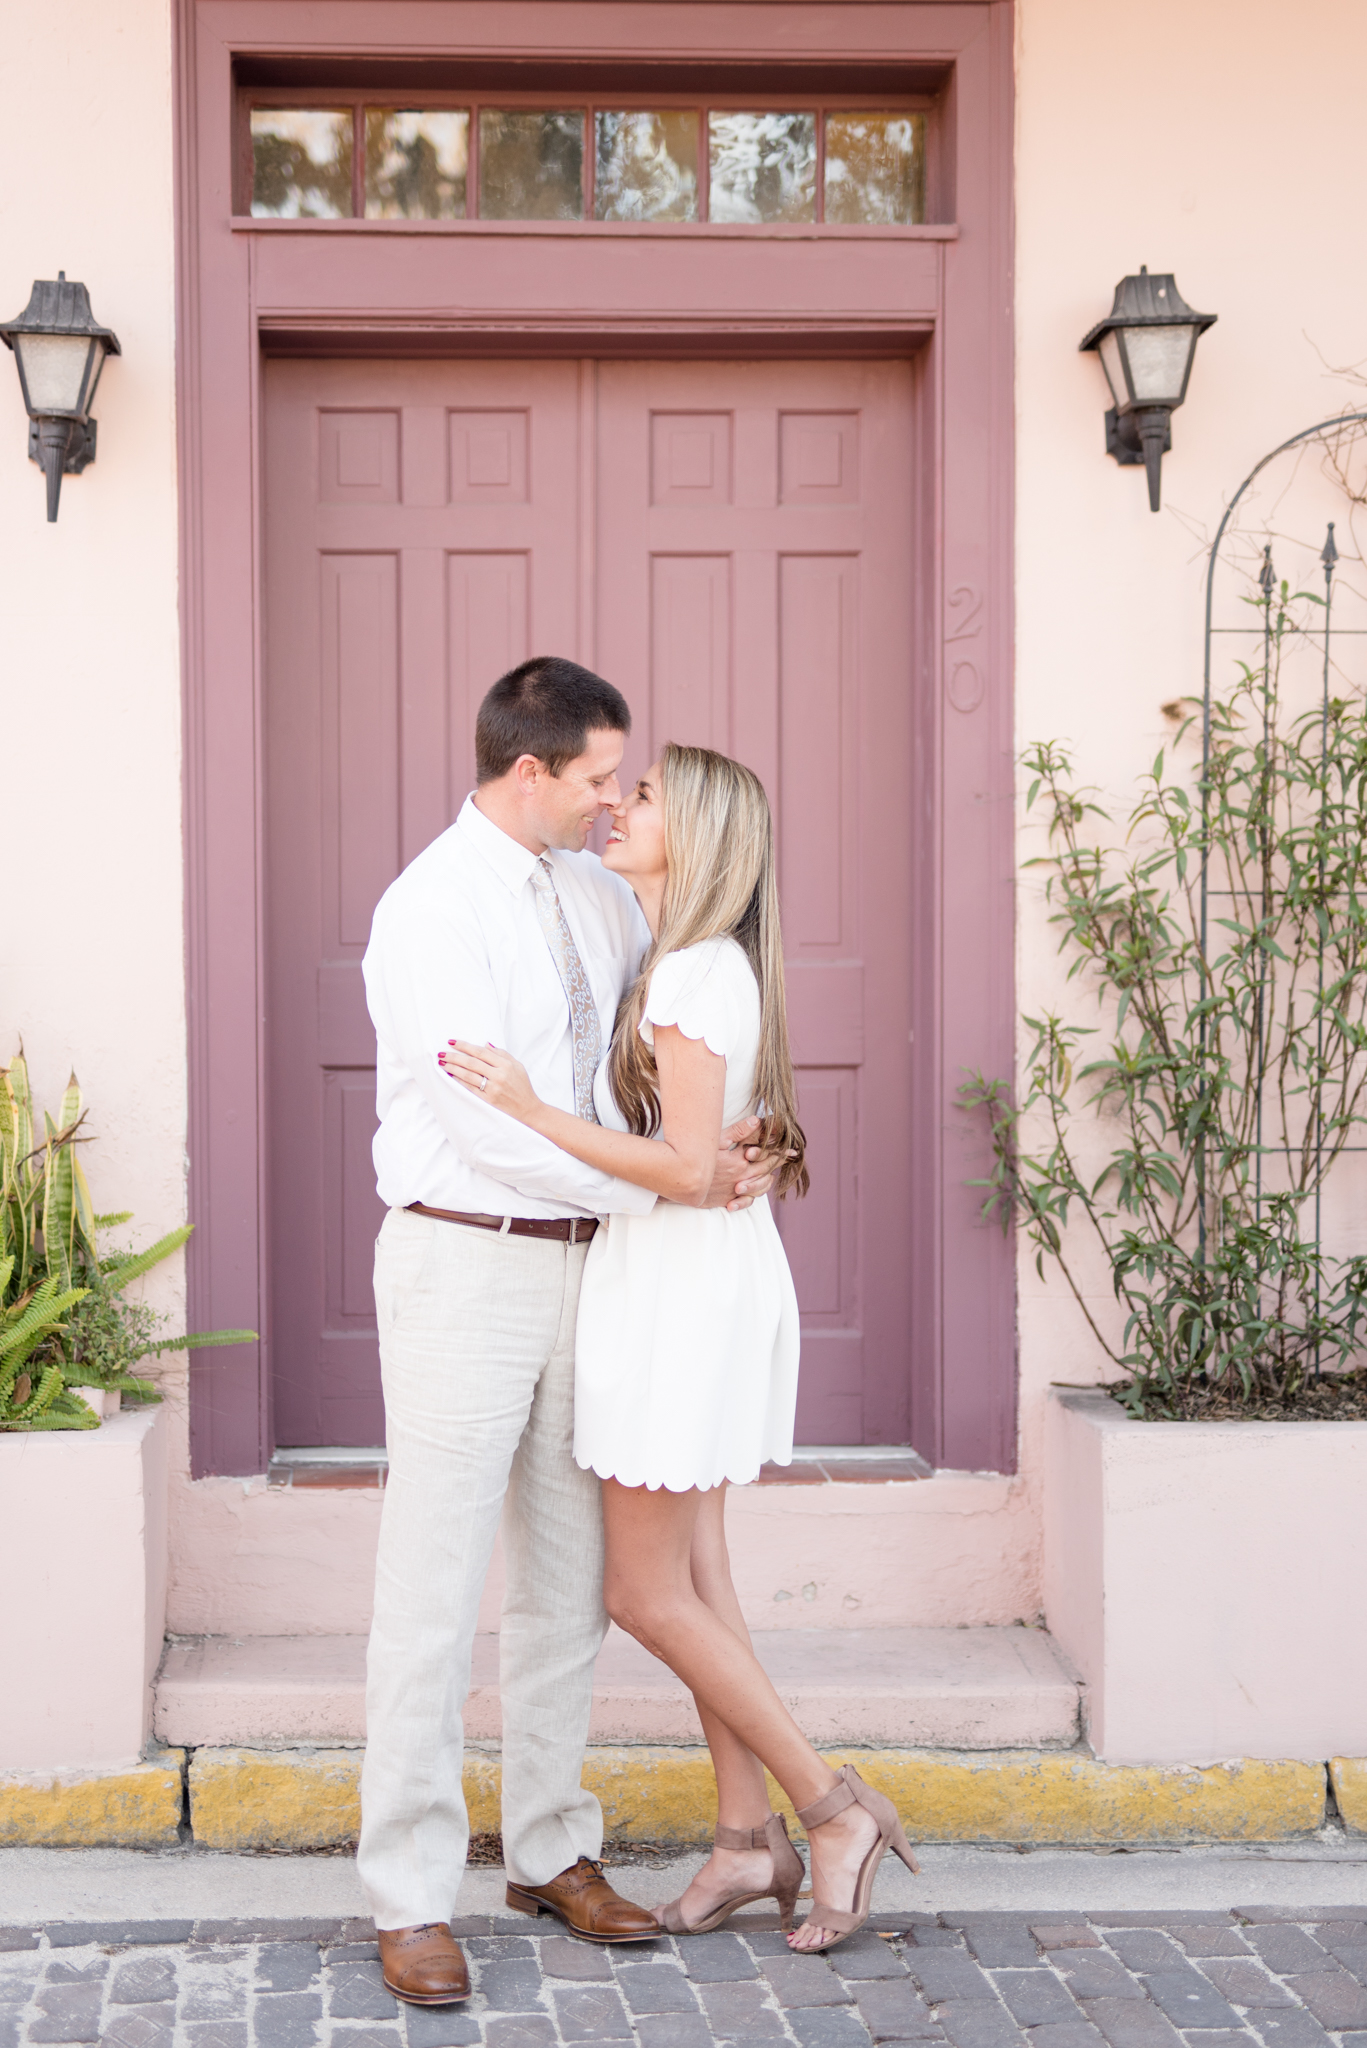 Man and woman almost kiss in front of purple door.